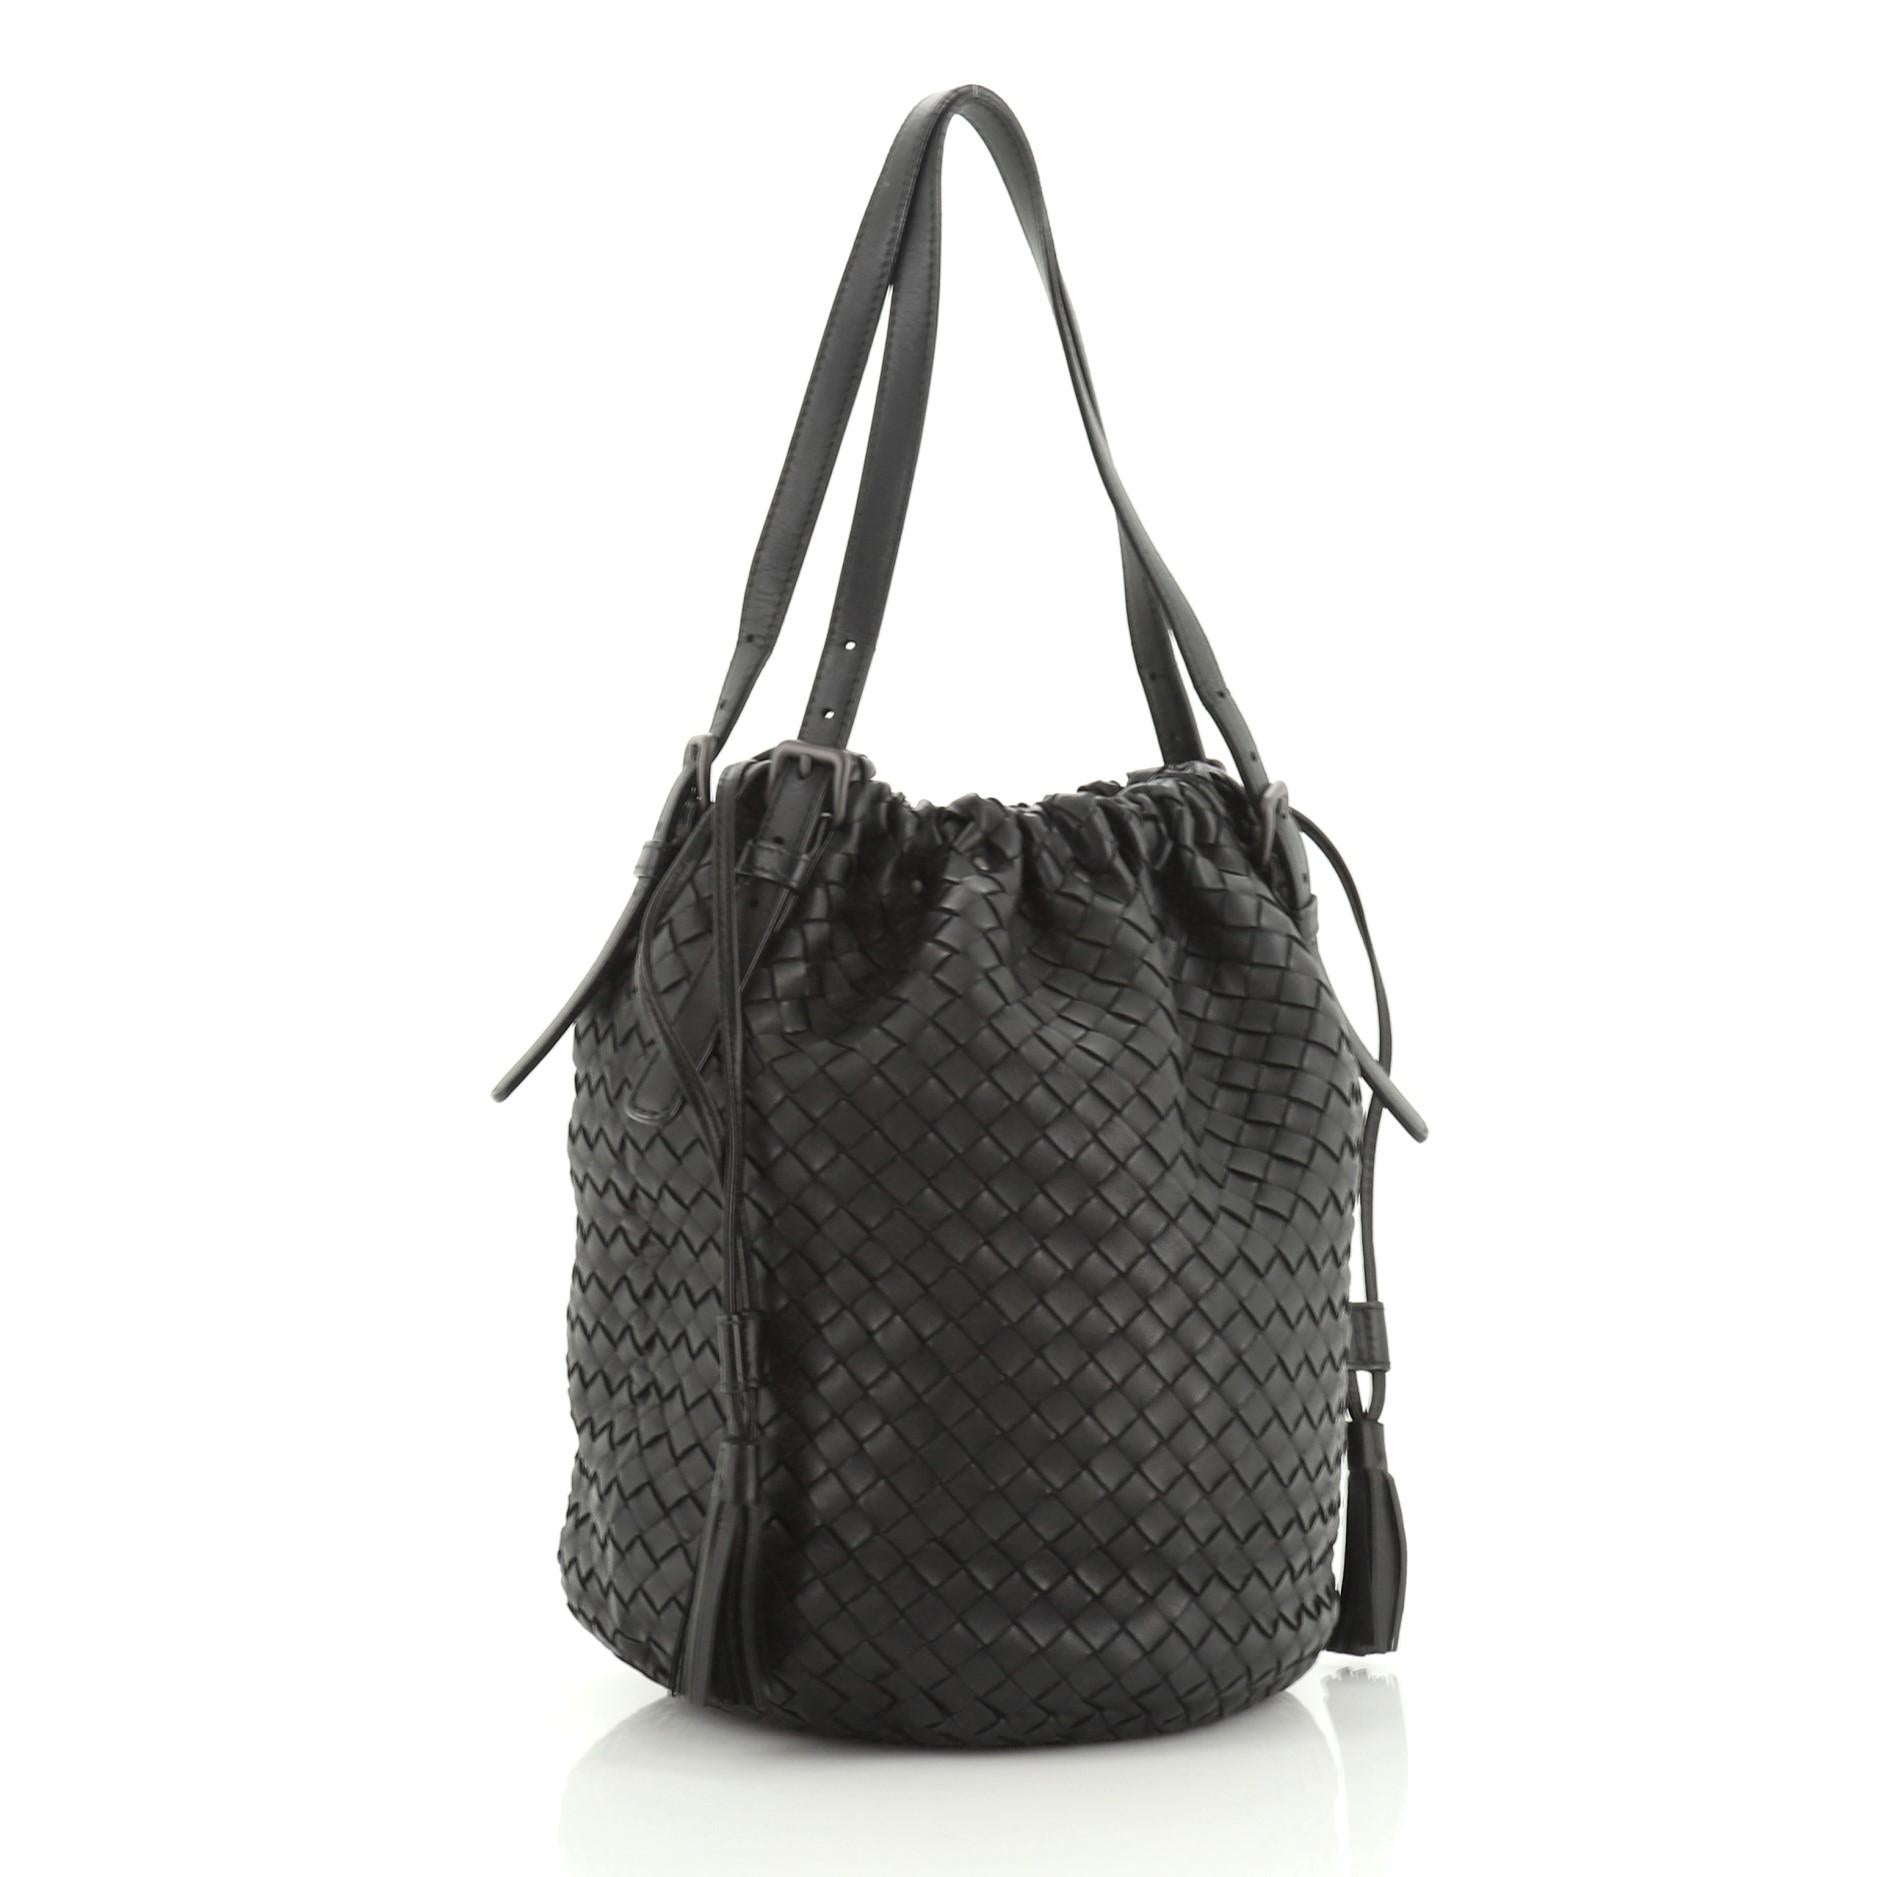 This Bottega Veneta Drawstring Tassel Bucket Bag Intrecciato Nappa Small, crafted from black intrecciato nappa leather, features adjustable leather straps and matte gunmetal-tone hardware. Its drawstring closure opens to a neutral suede interior